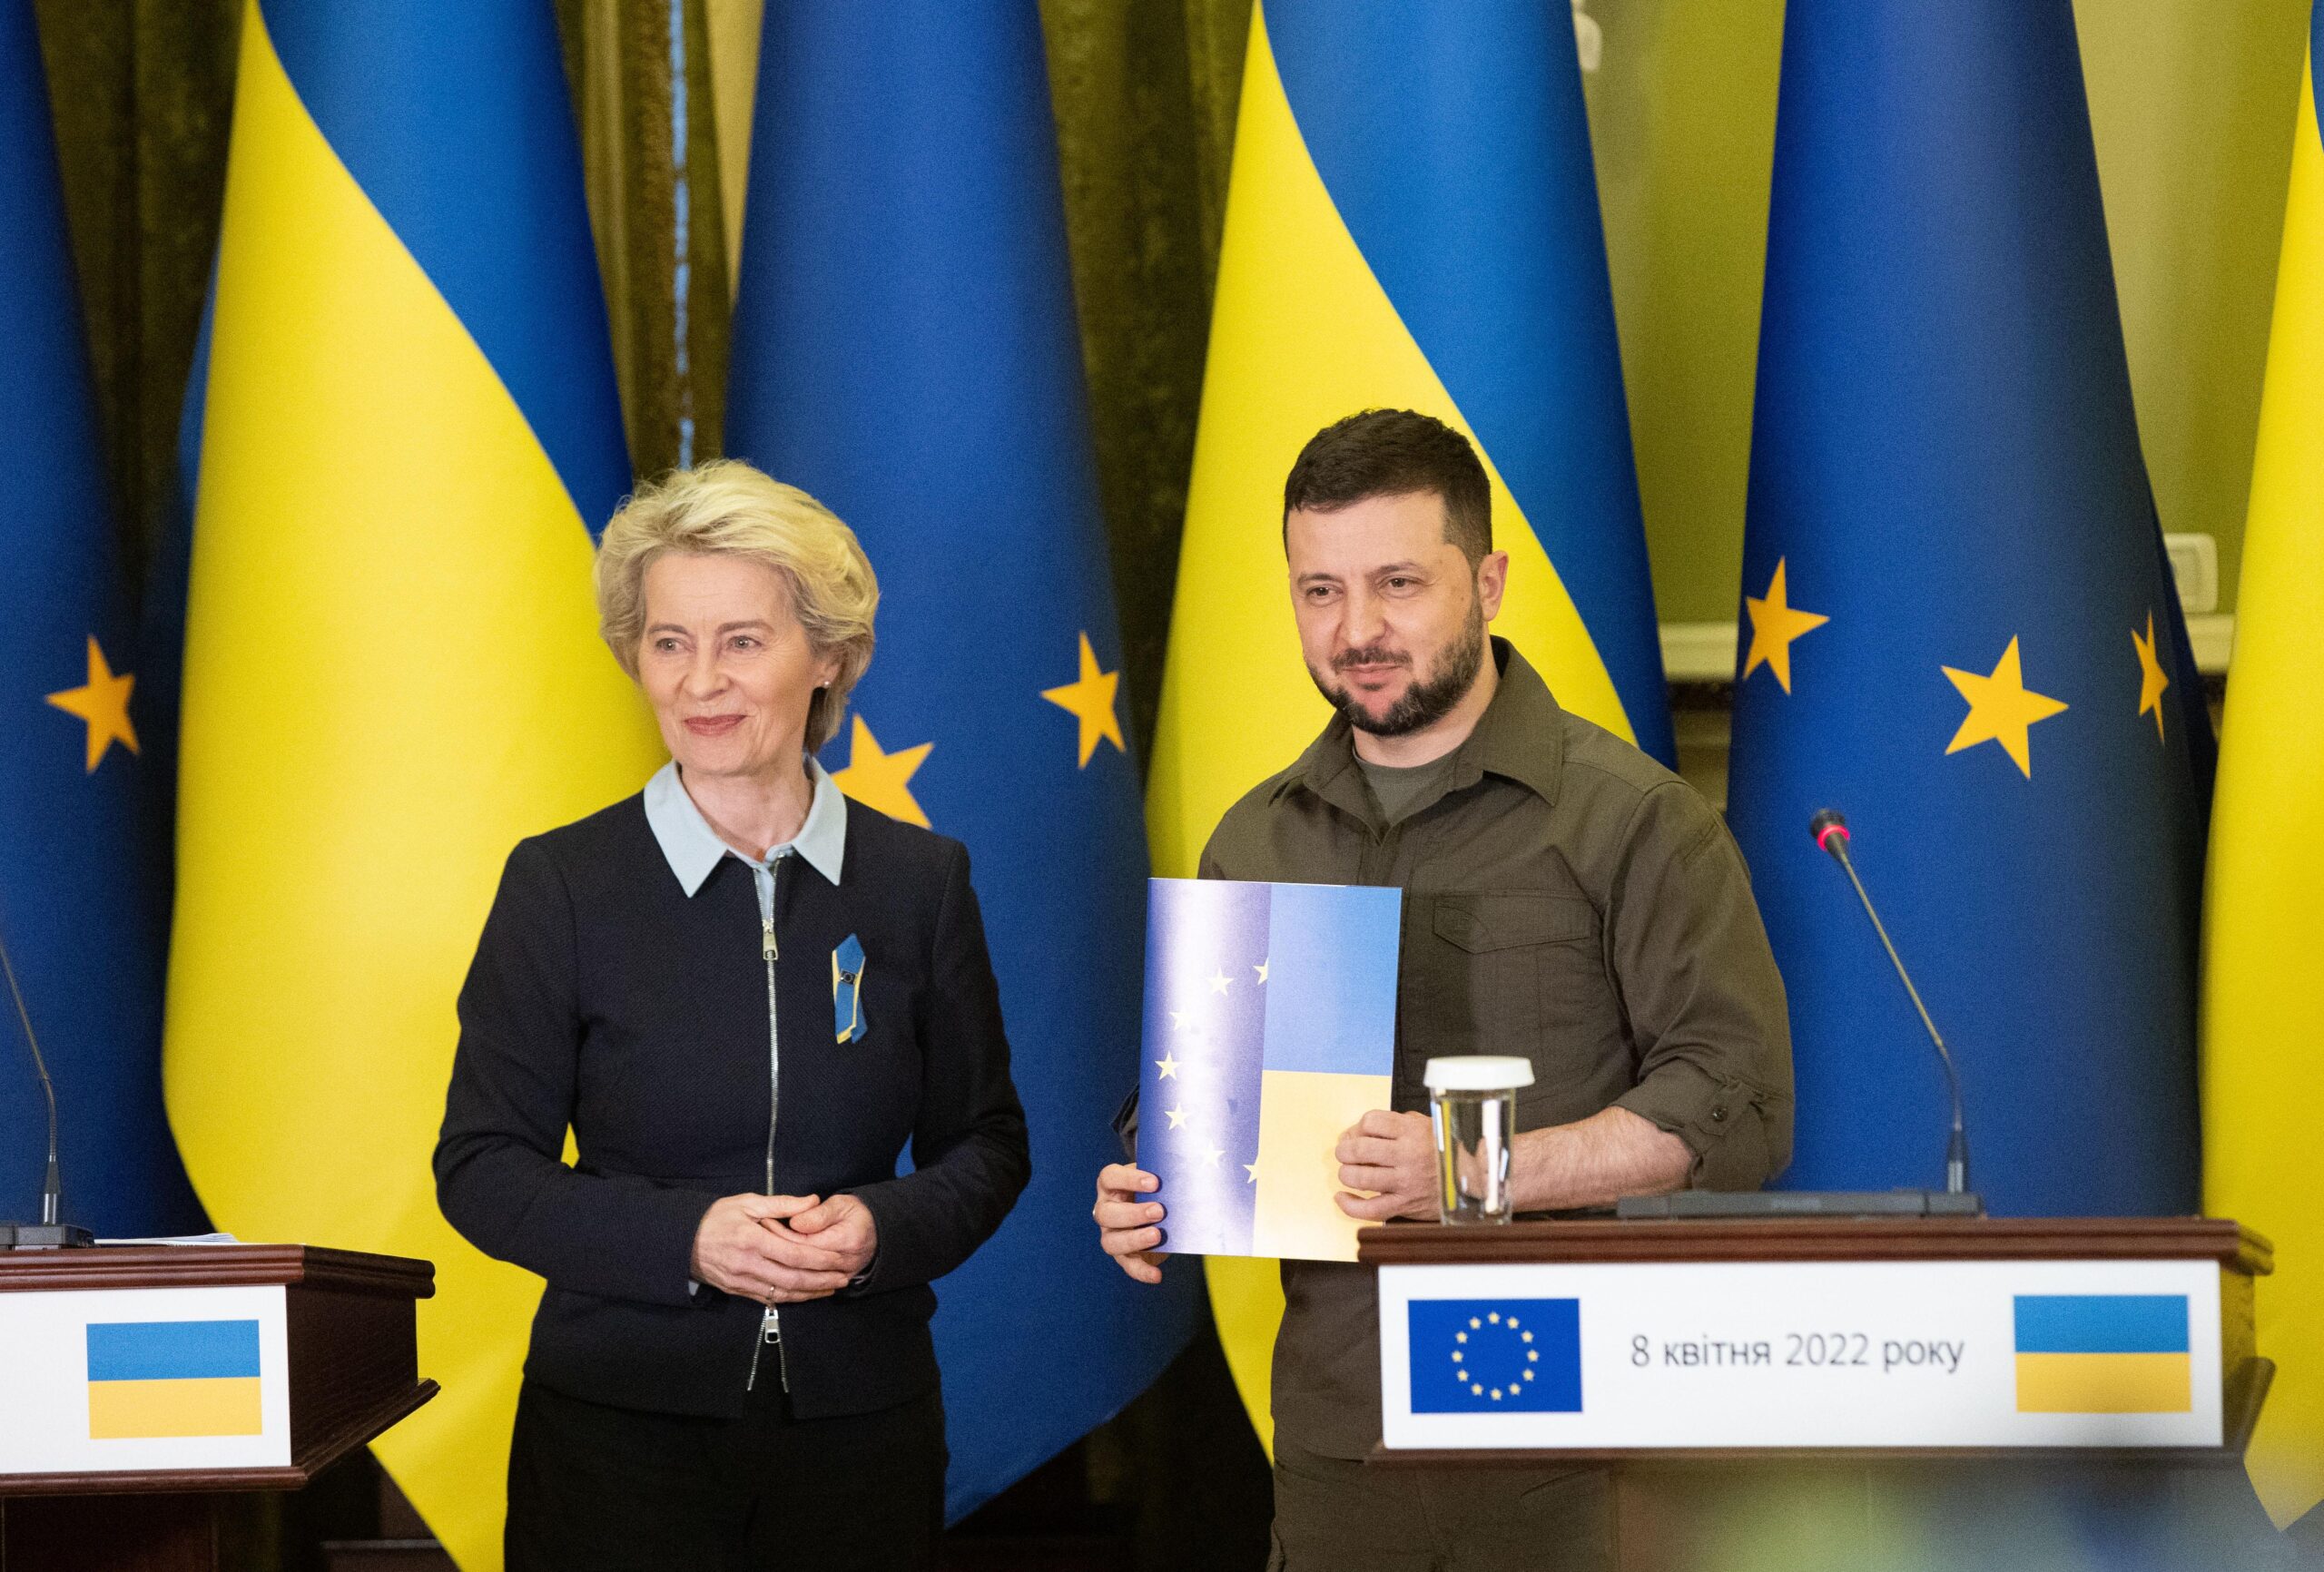 Image of Security - Meeting of the President of Ukraine with the President of the European Commissio